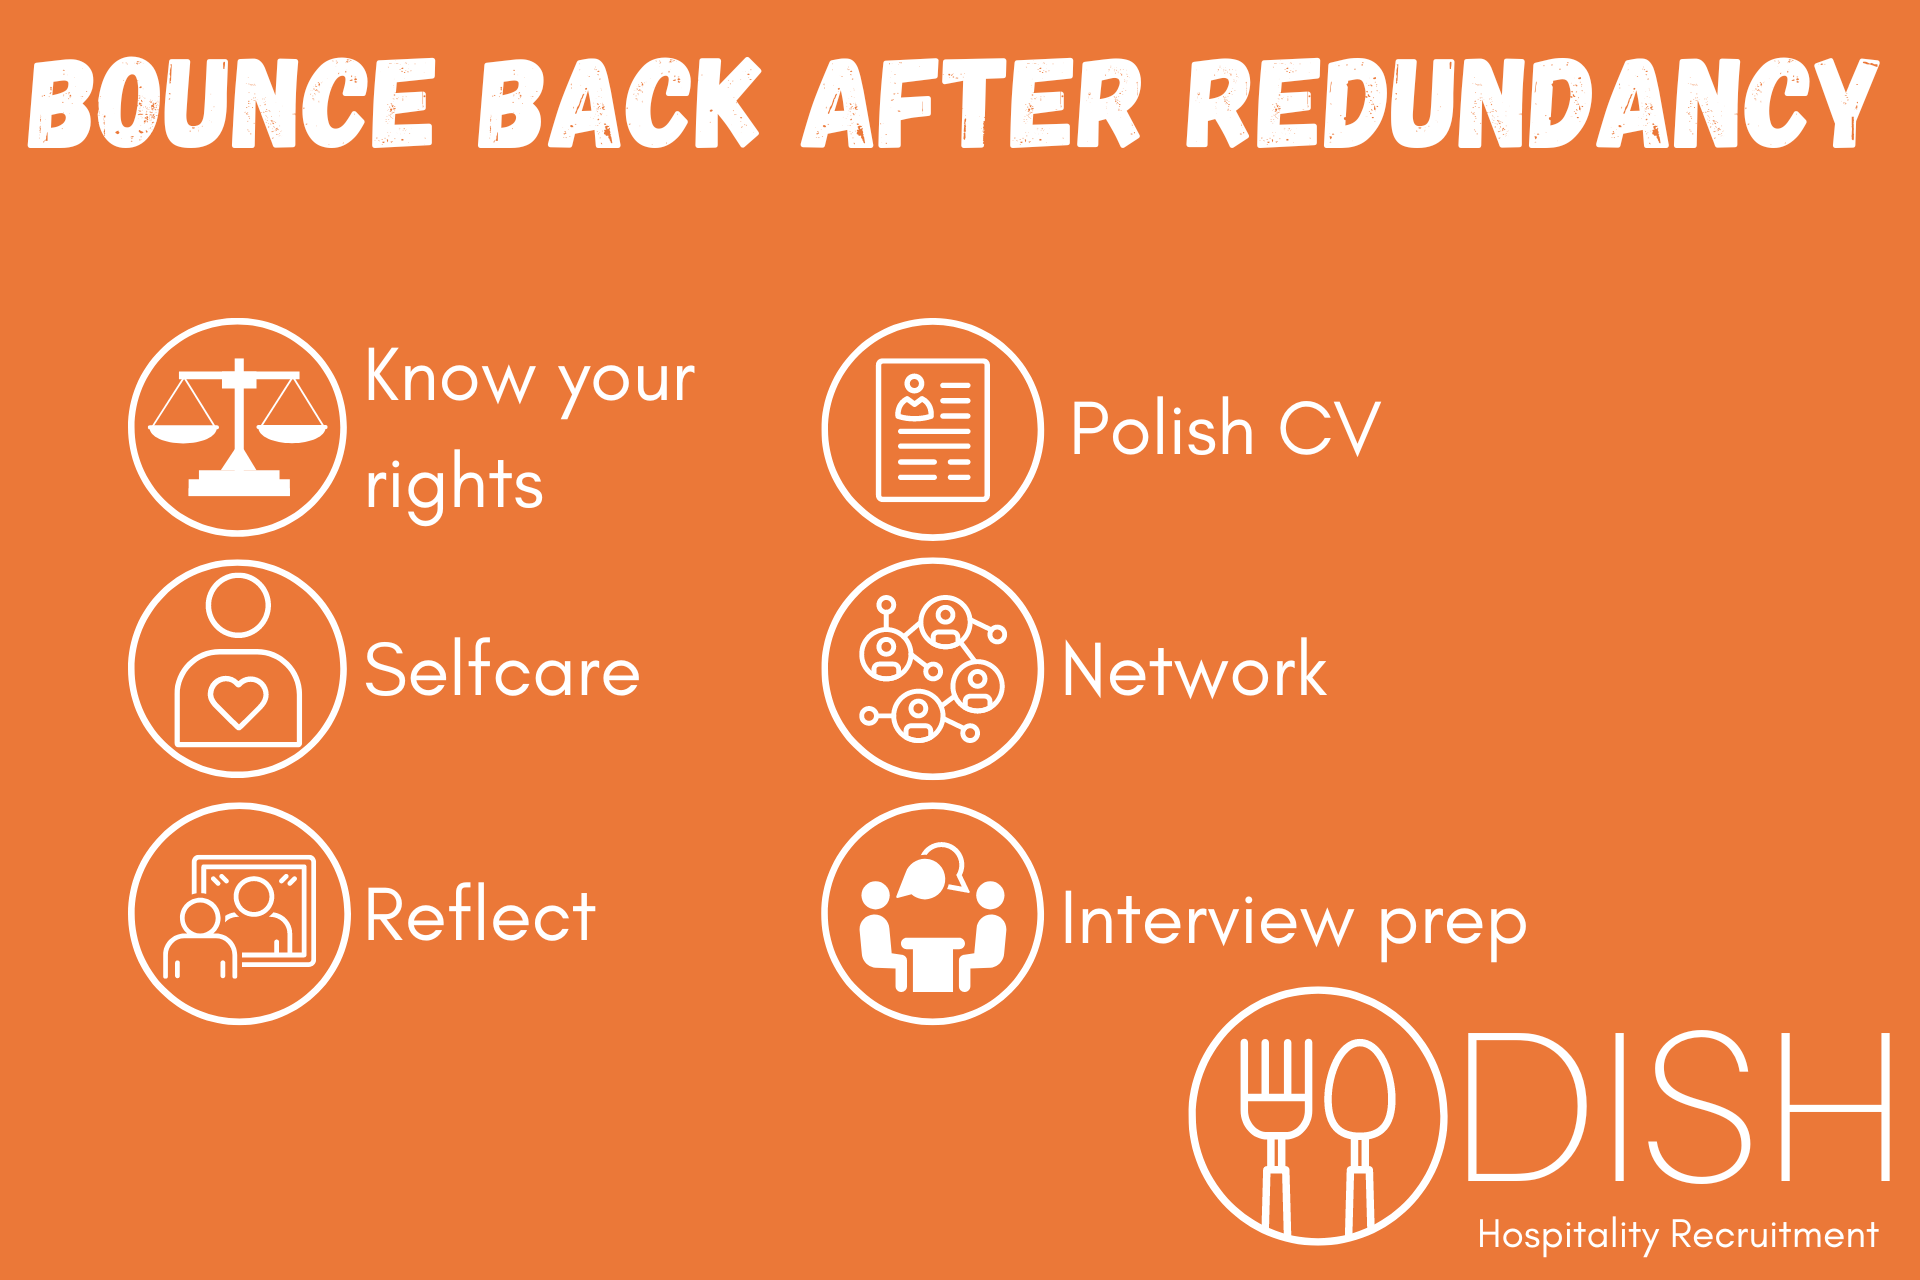 6 Ways to Bounce Back After Redundancy